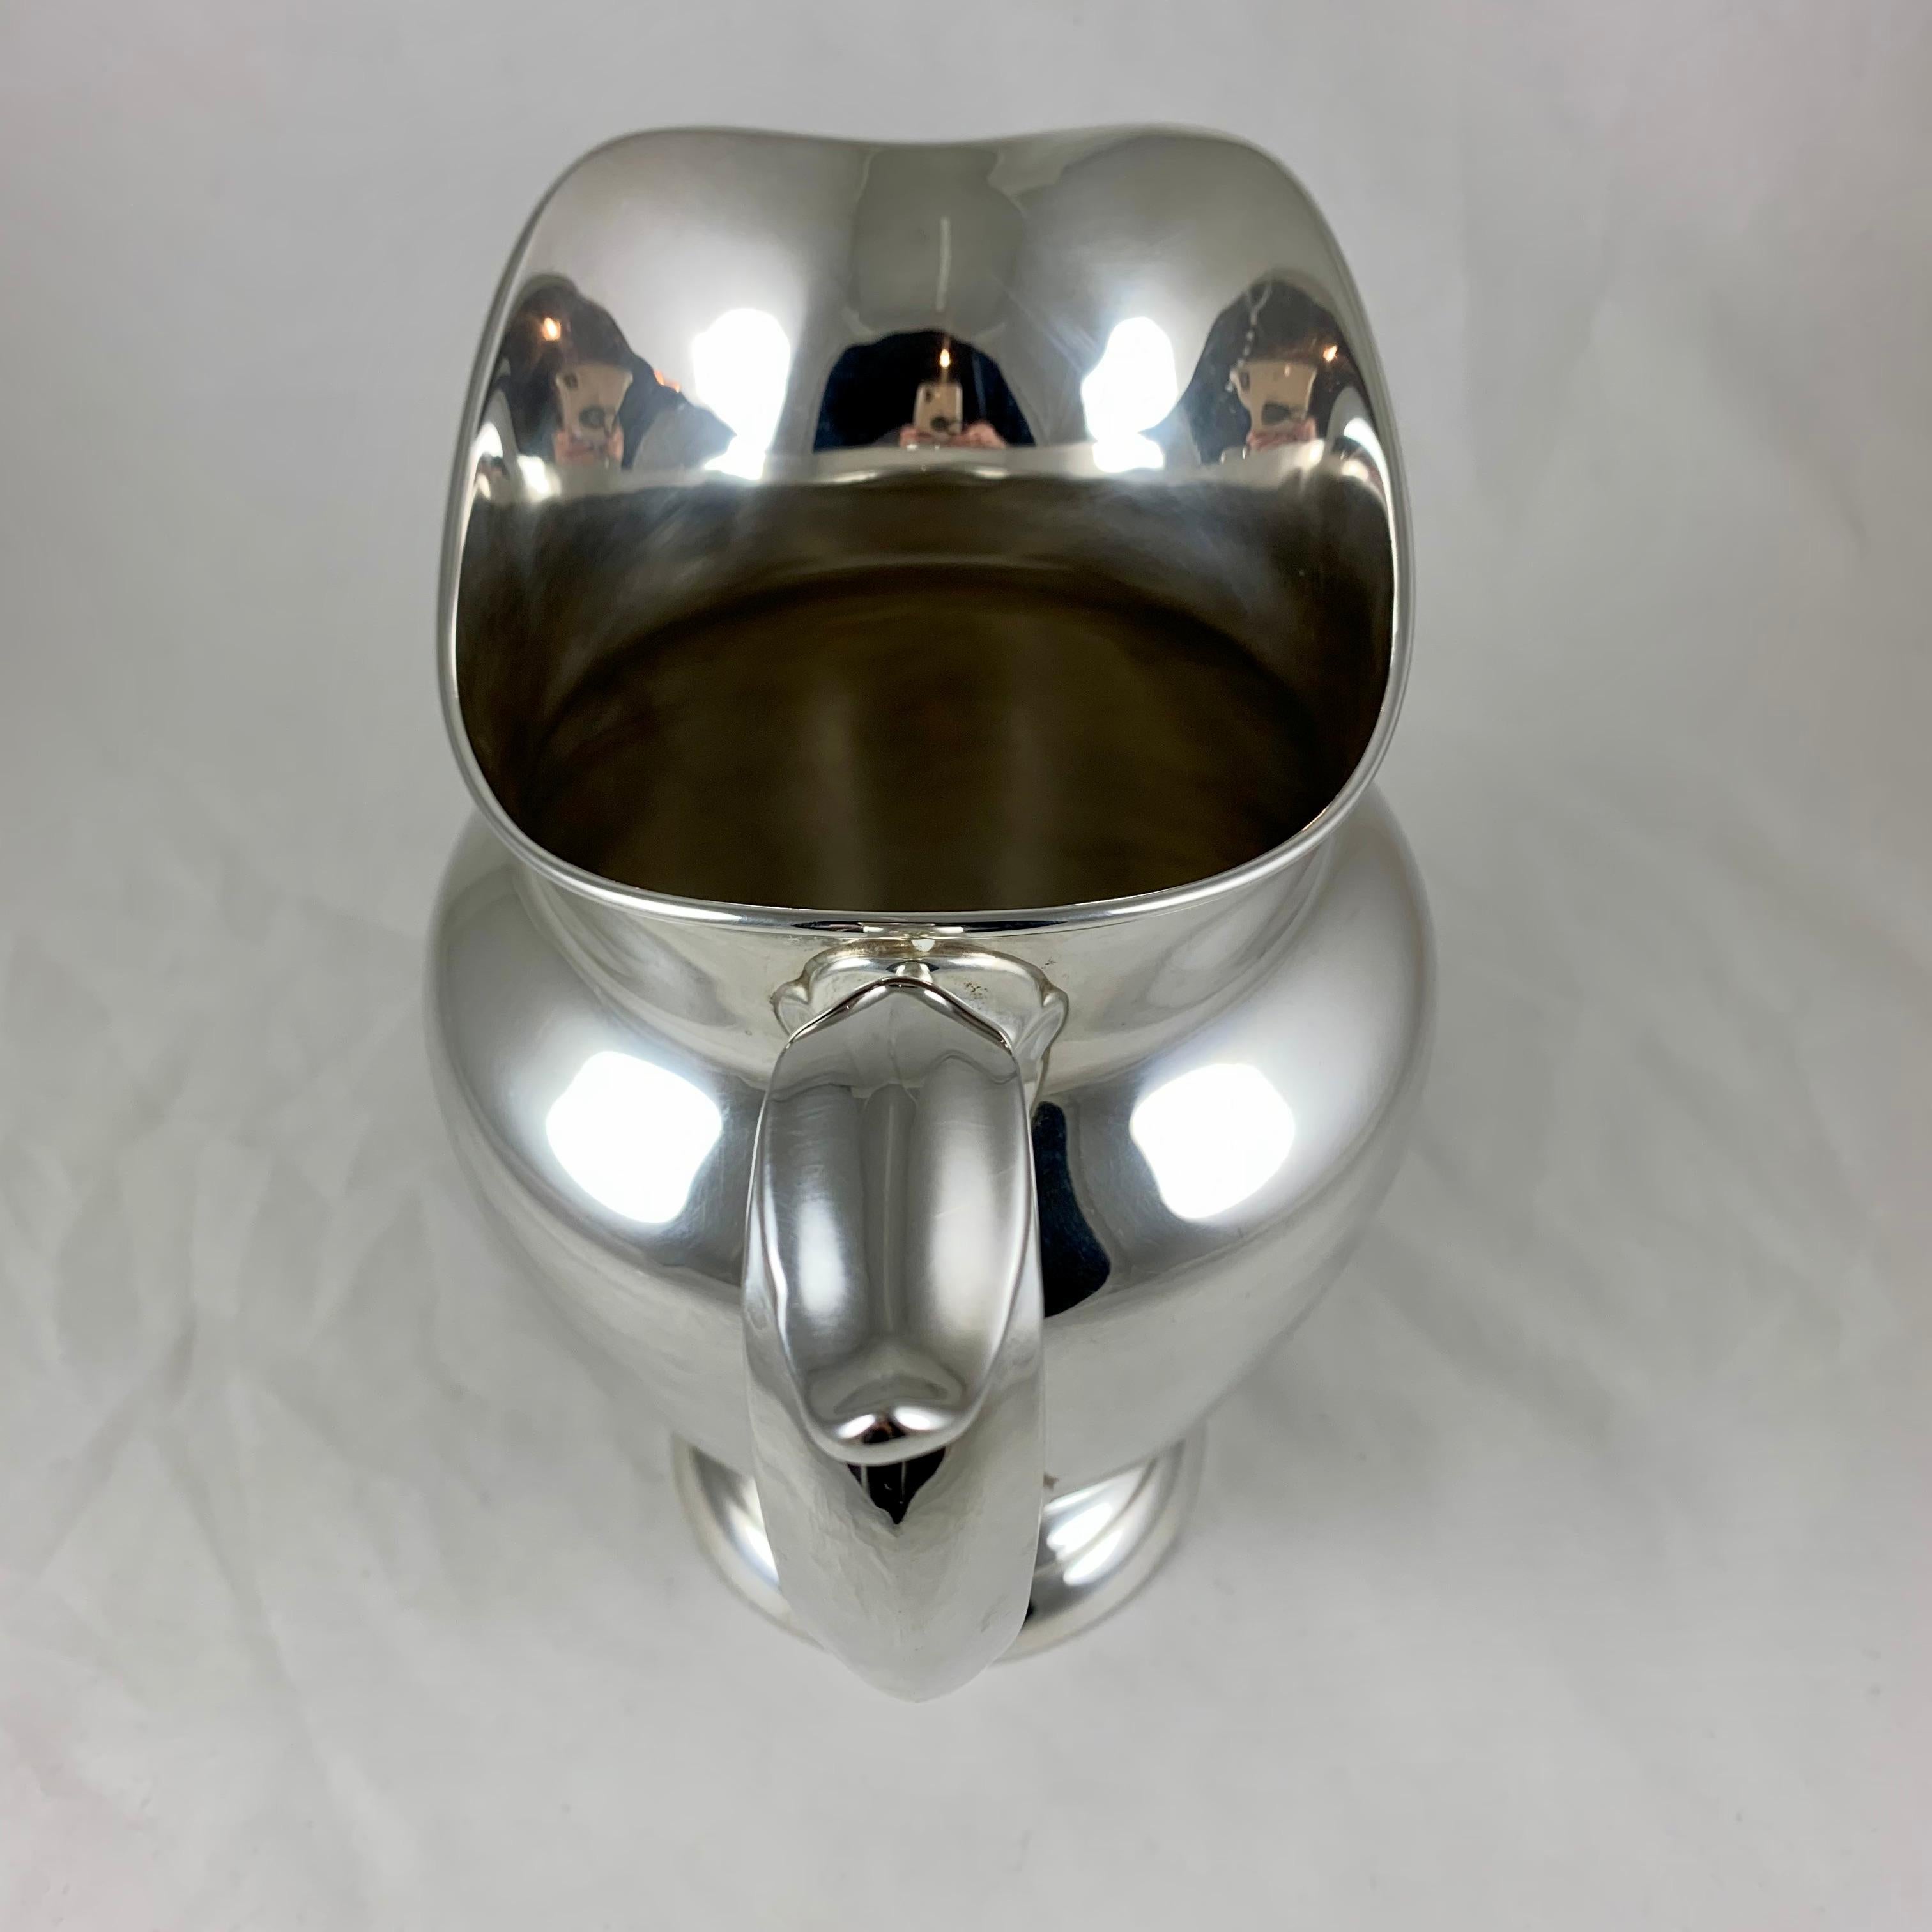 Mid-20th Century Gorham American Sterling Silver Large Water Pitcher, Dated 1959